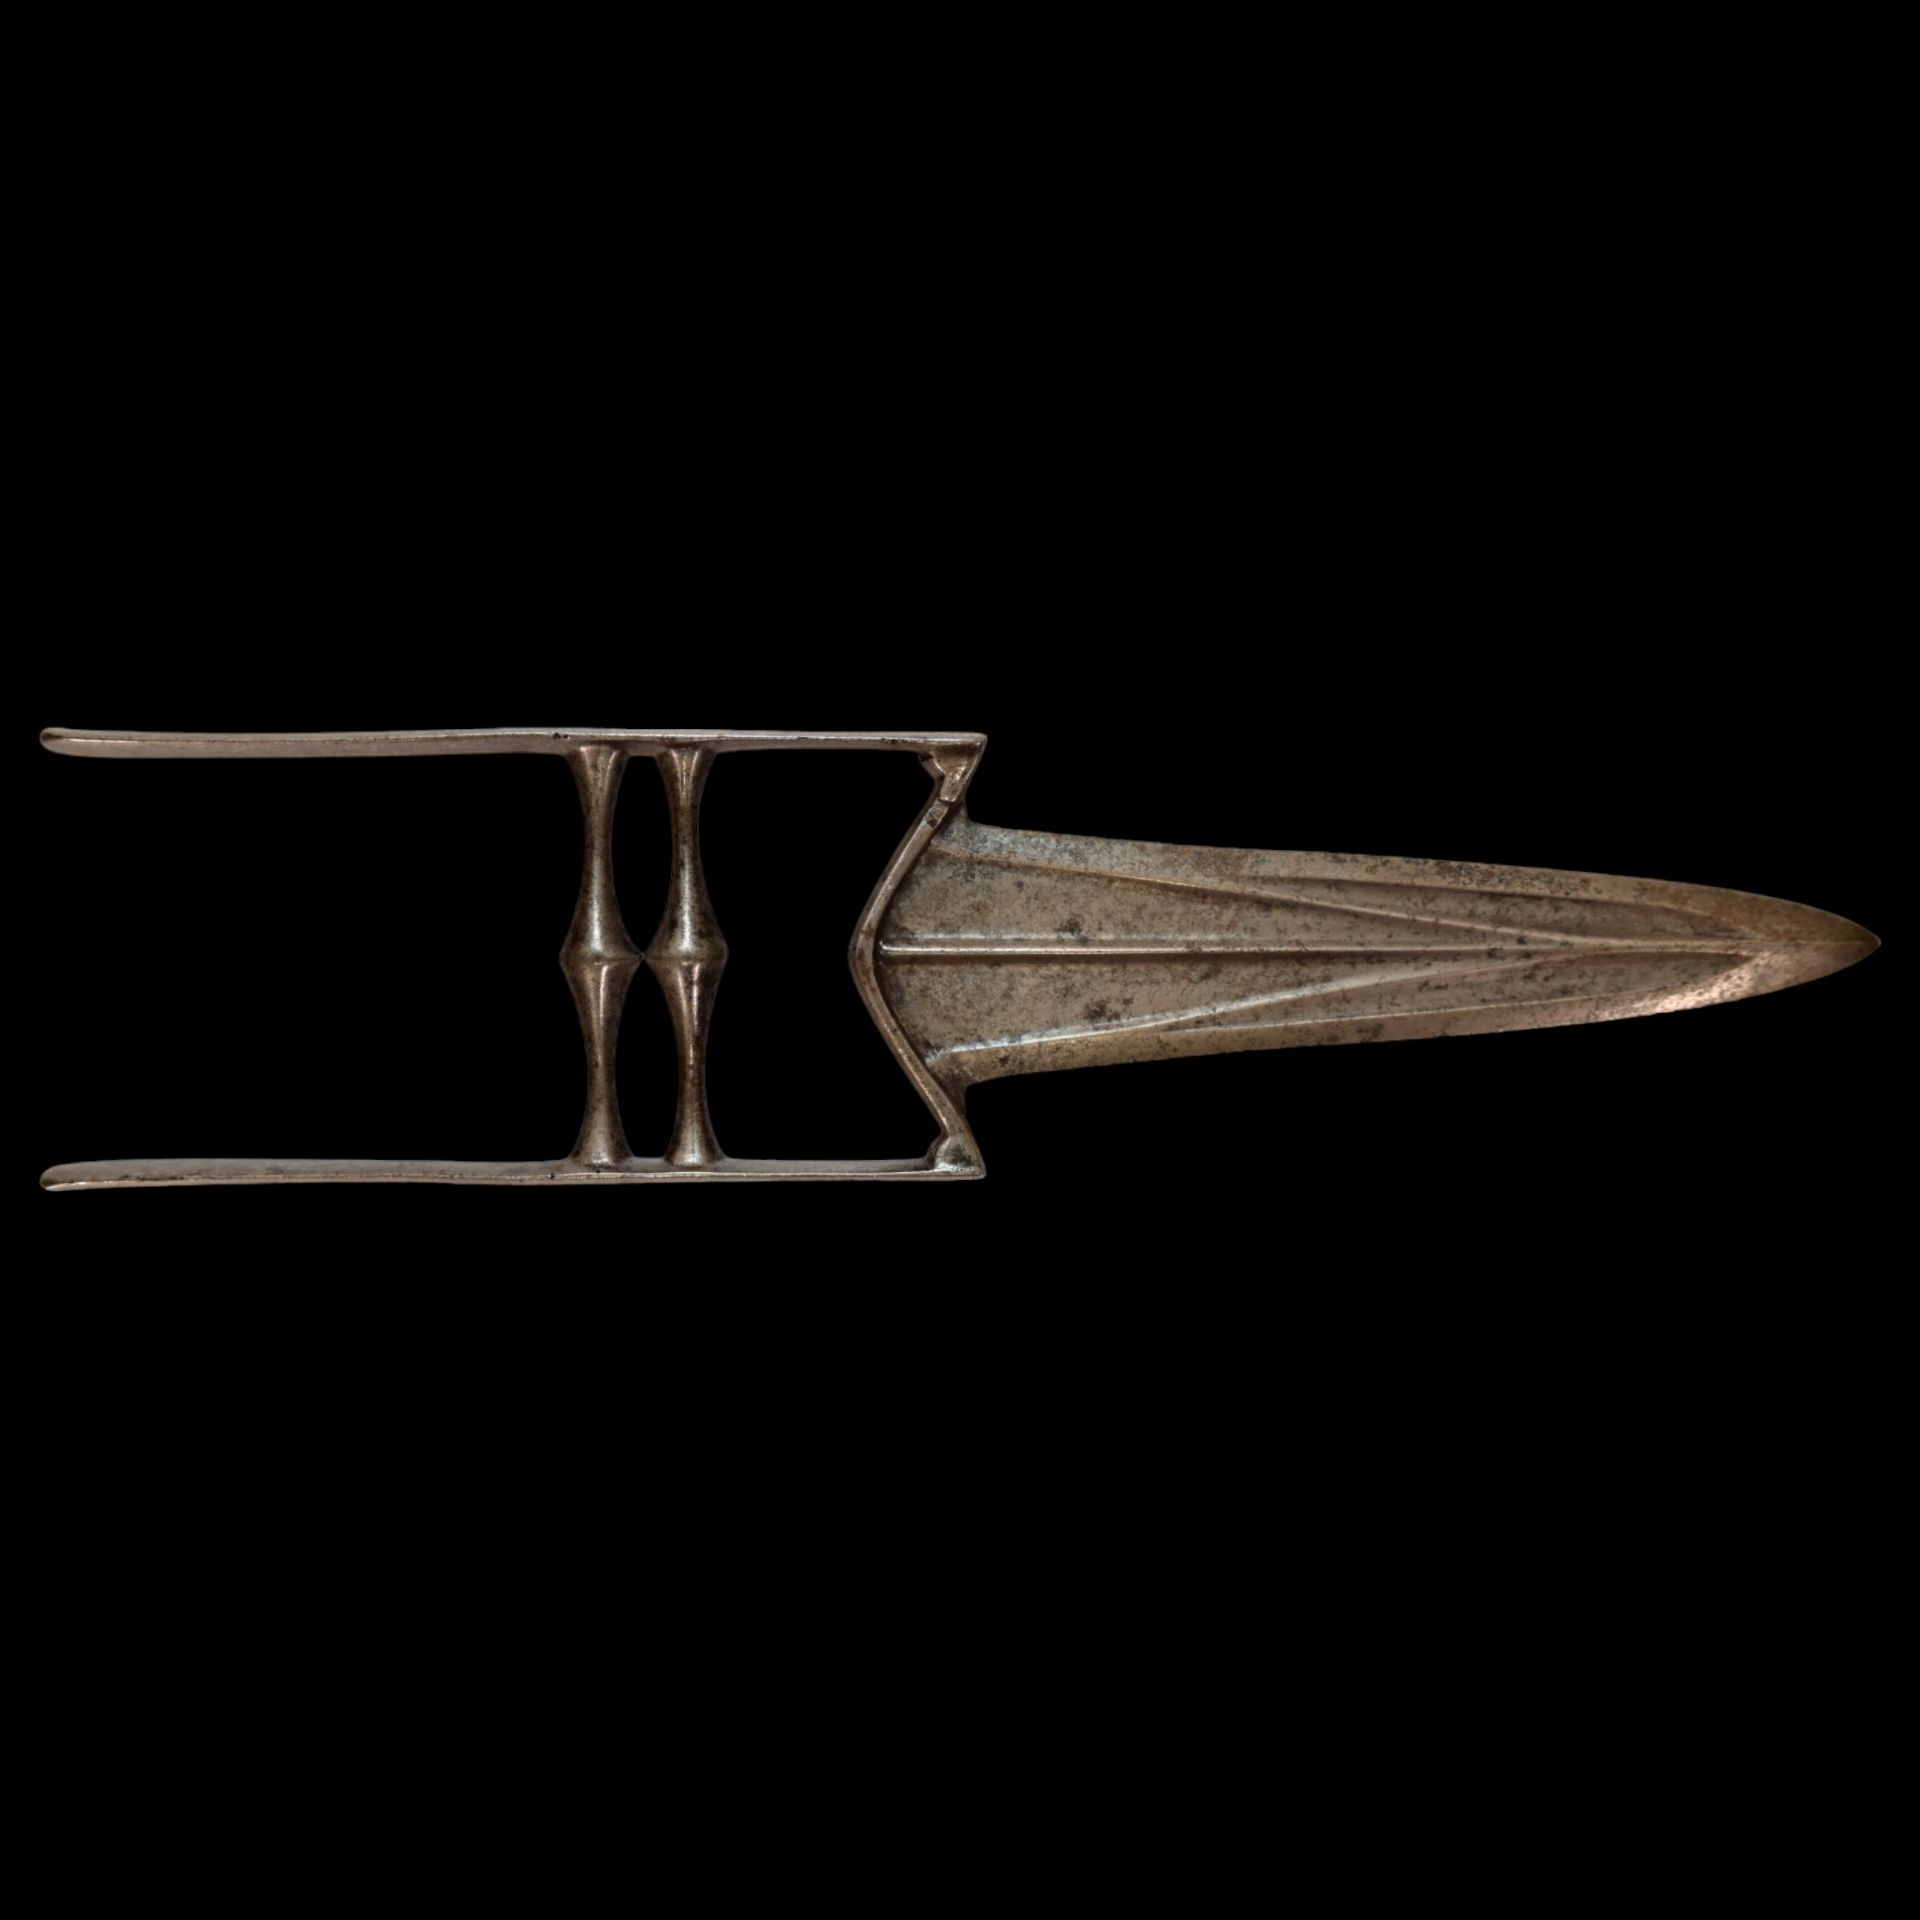 South Indian Katar dagger, 19th century. - Image 3 of 7